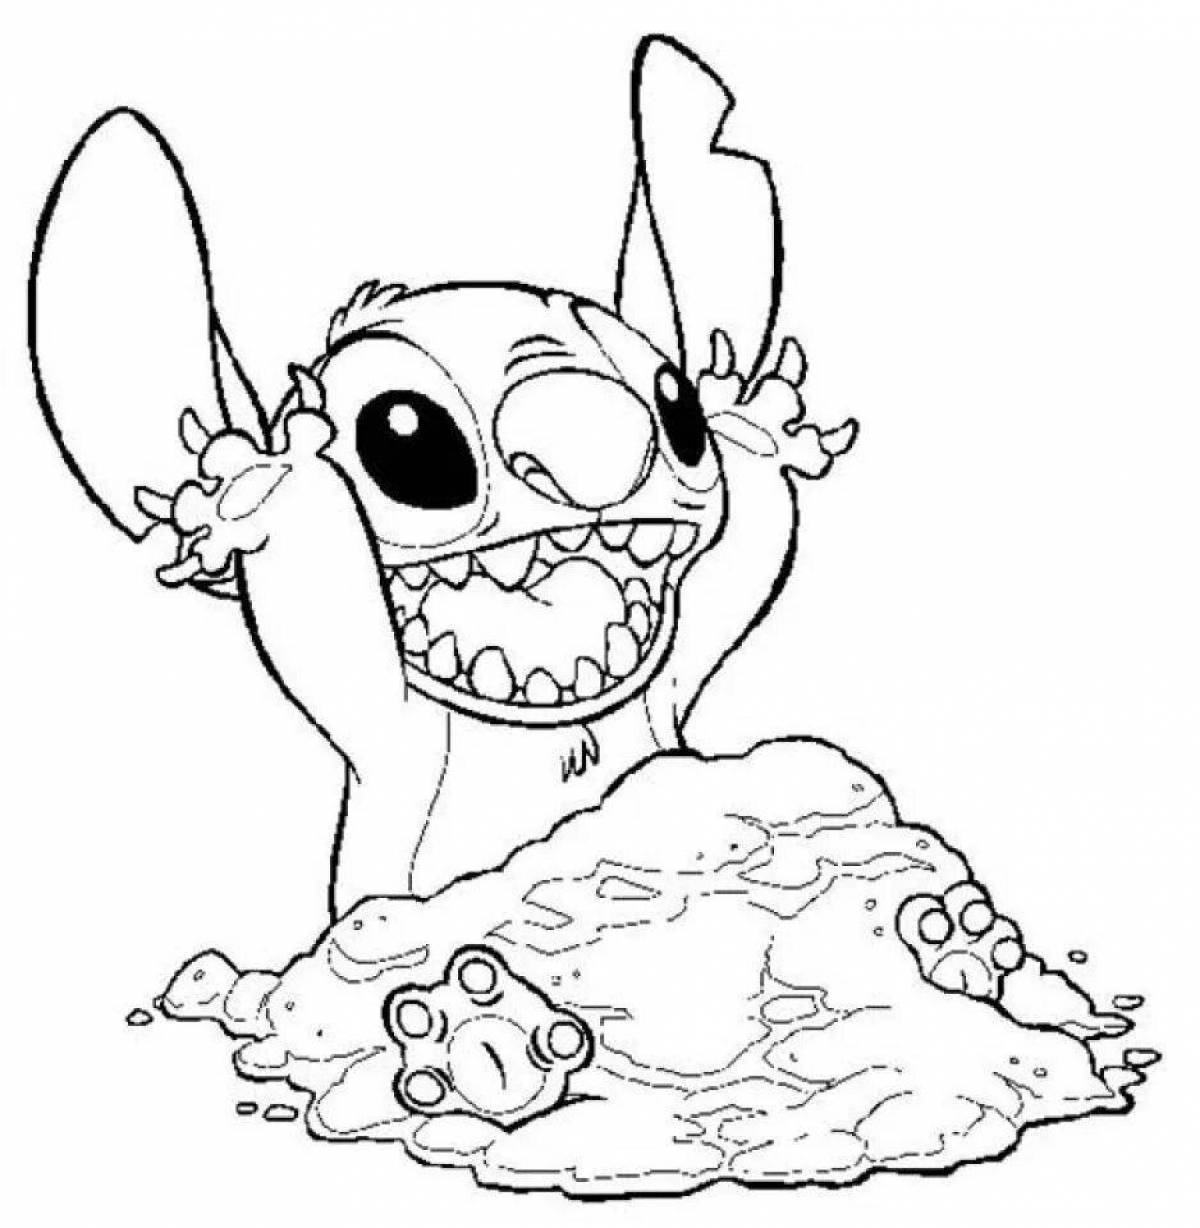 Fascinating stitch and pikachu coloring book